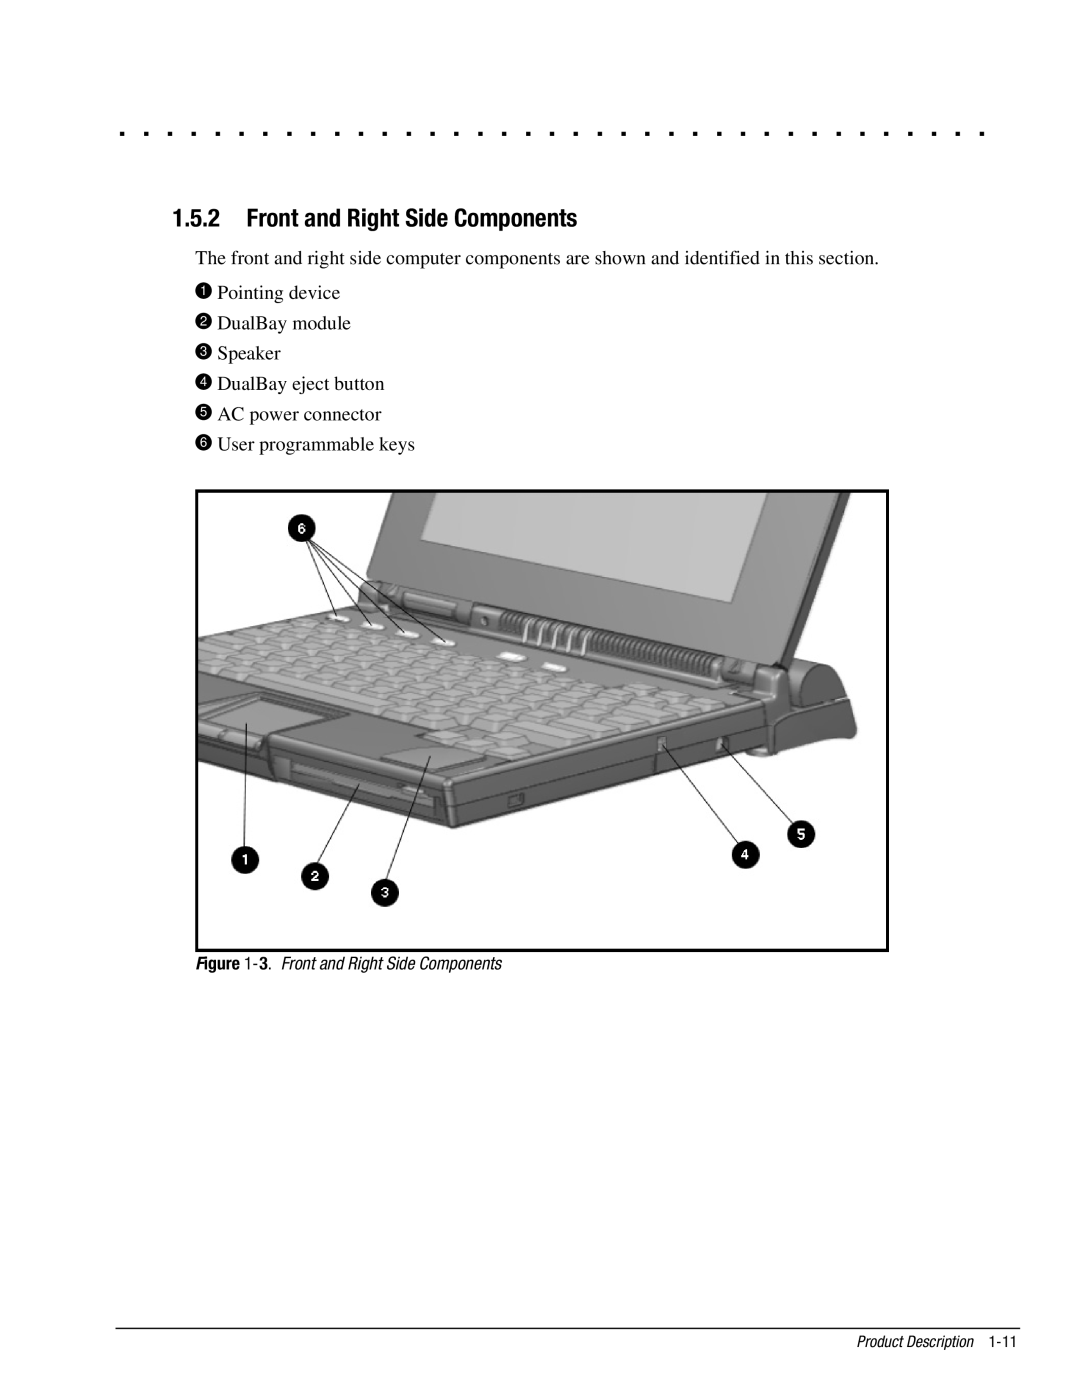 Compaq 4125T, 4130T Front and Right Side Components, Pointing device 2 DualBay module 3 Speaker 4 DualBay eject button 